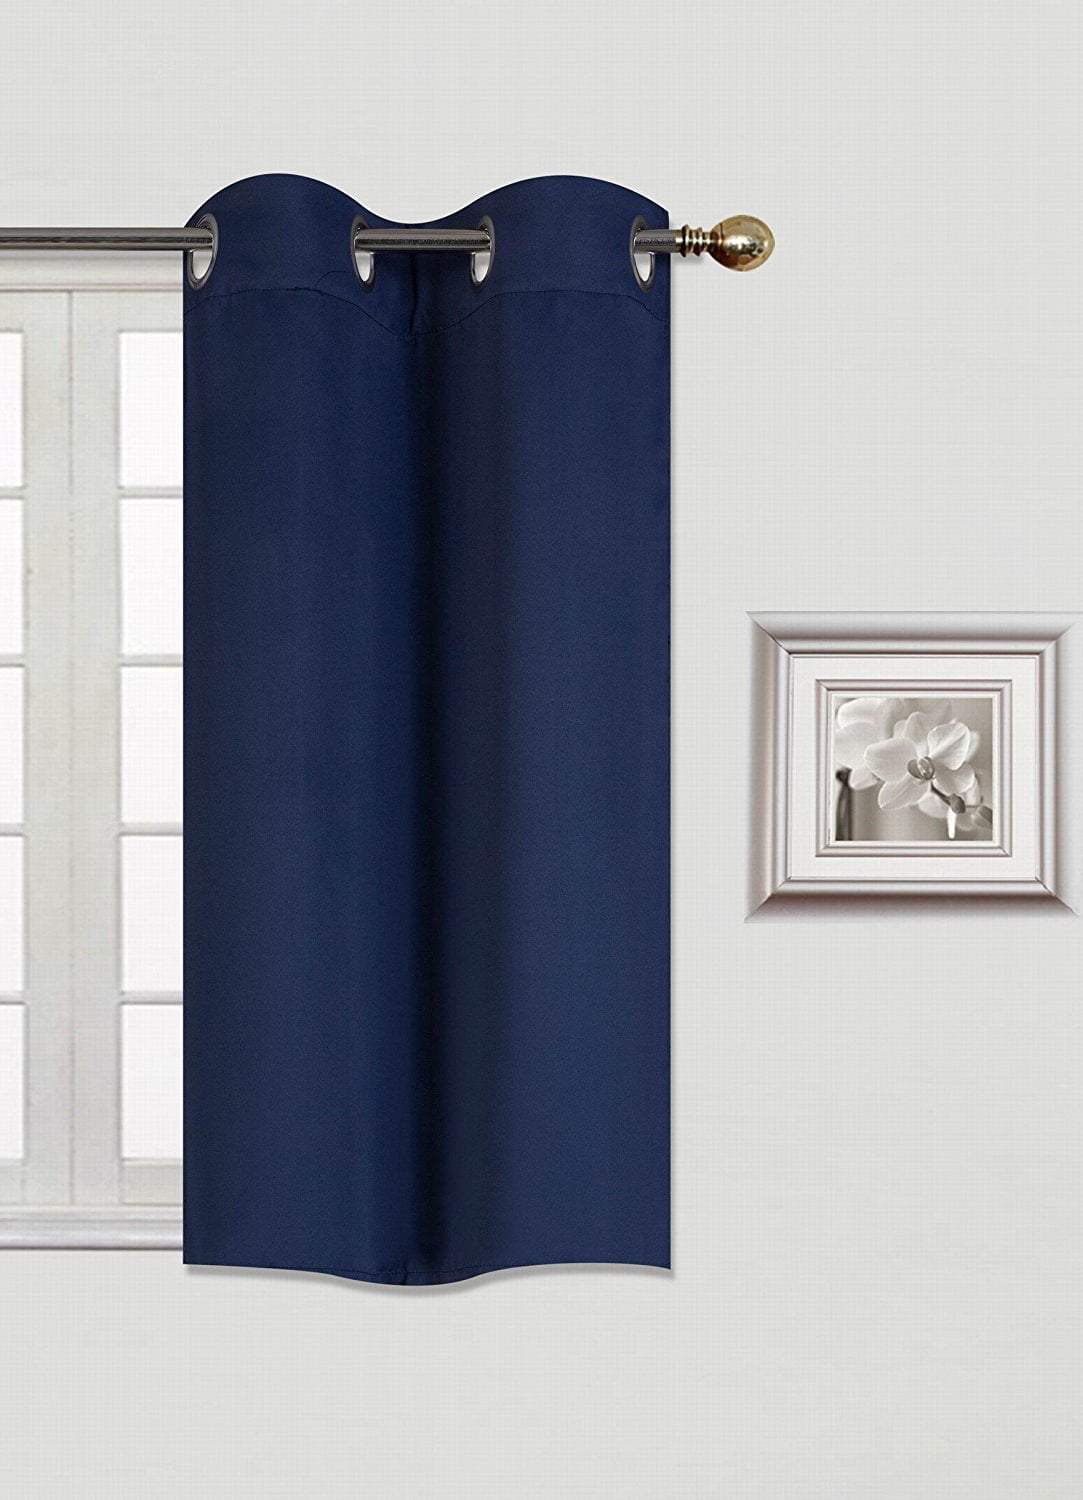 (K54) Navy Blue 1 Panel Silver Grommets Window Curtain 3 Layered Thermal Heavy Thick Insulated Blackout Drape Treatment Size 30" Wide X 54" Length